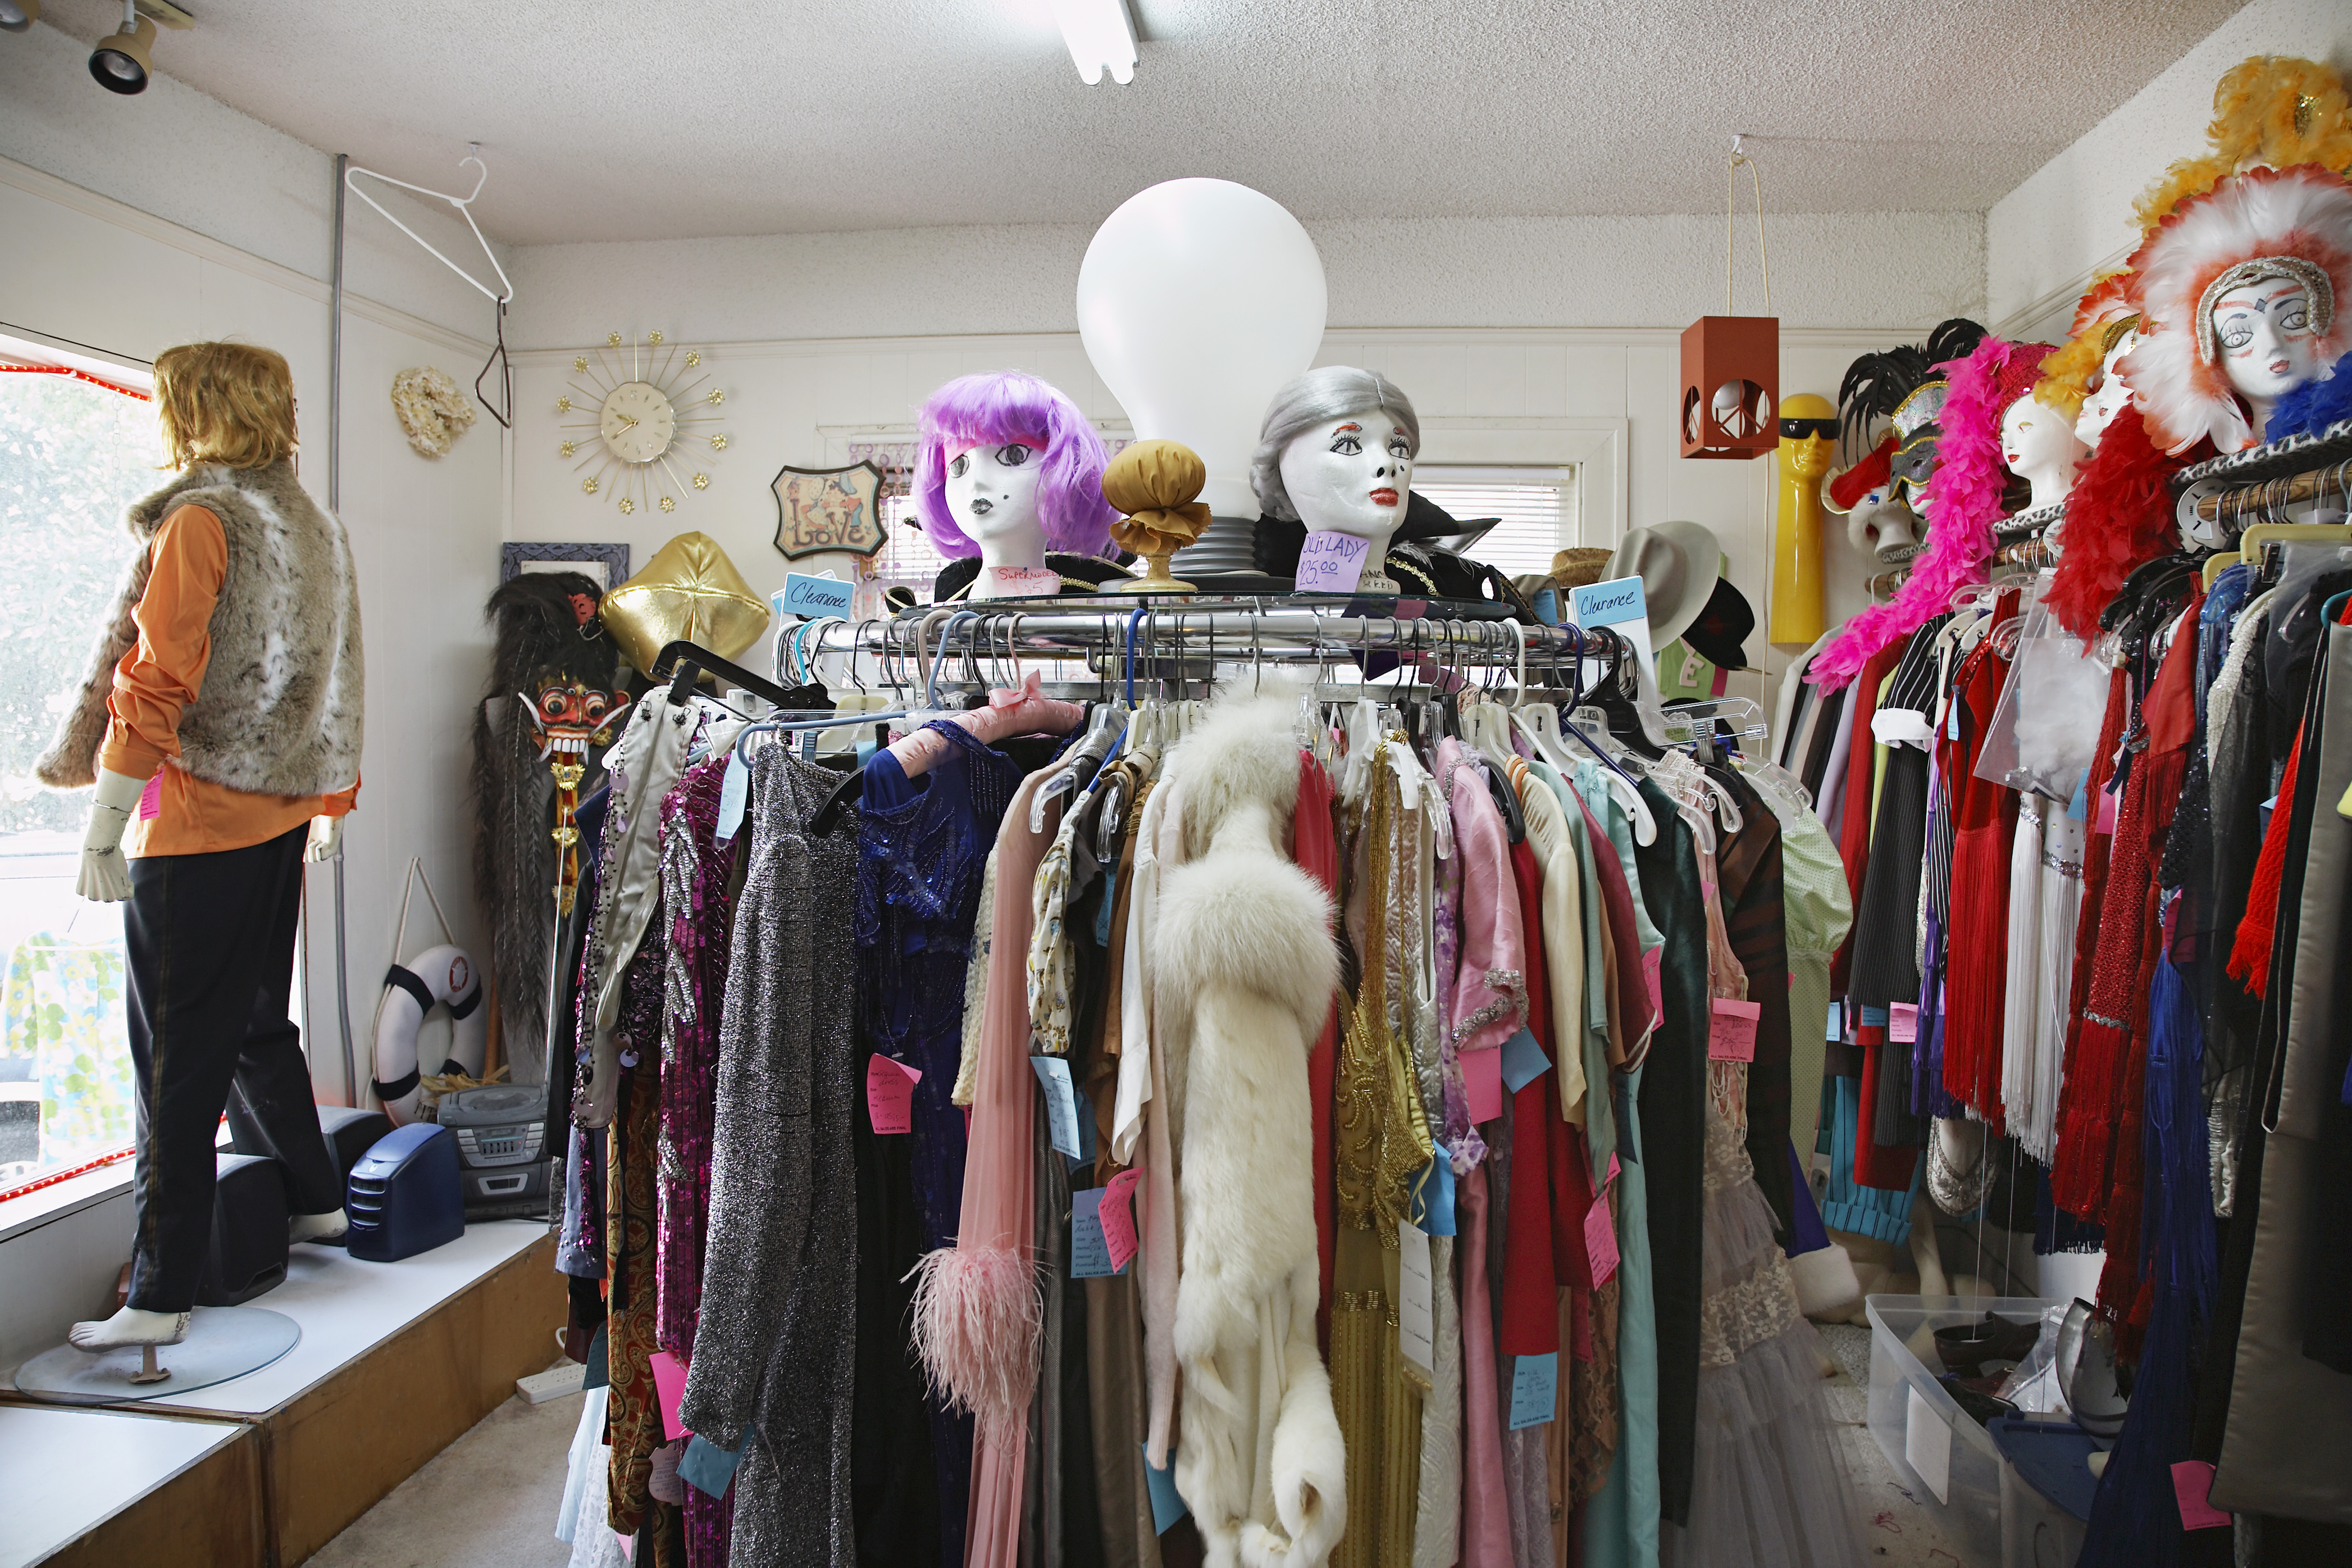 Clothing and wigs in crowded thrift store